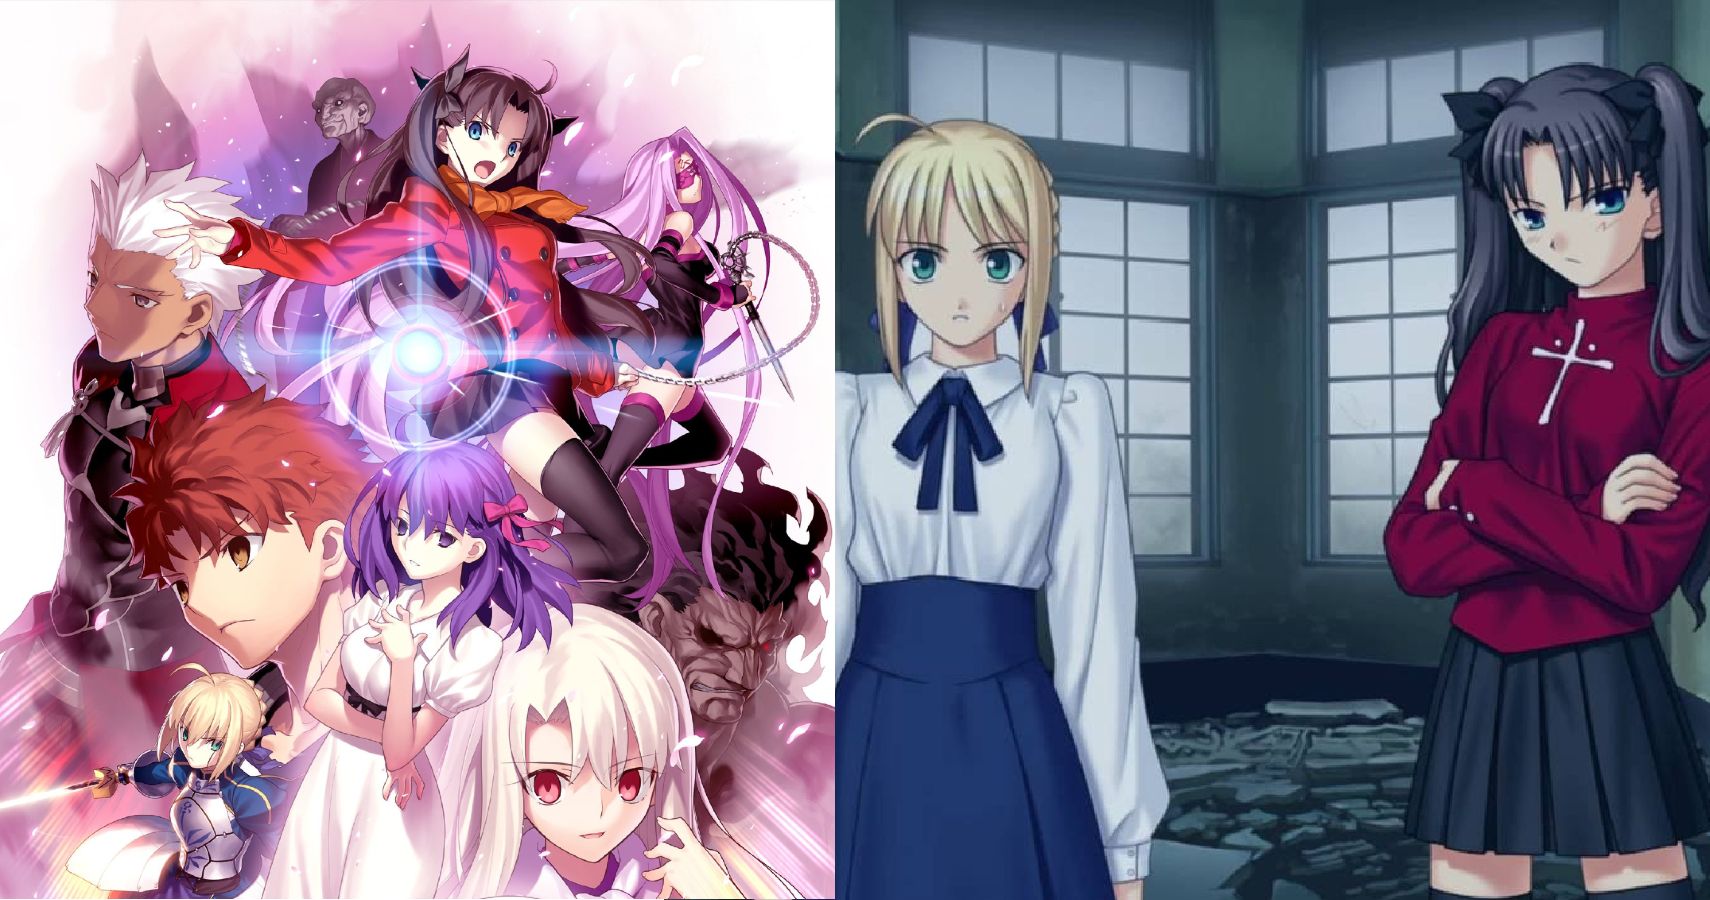 Fate 5 Reasons Why The Anime Is Great (& 5 Why The Visual Novels Are Better)